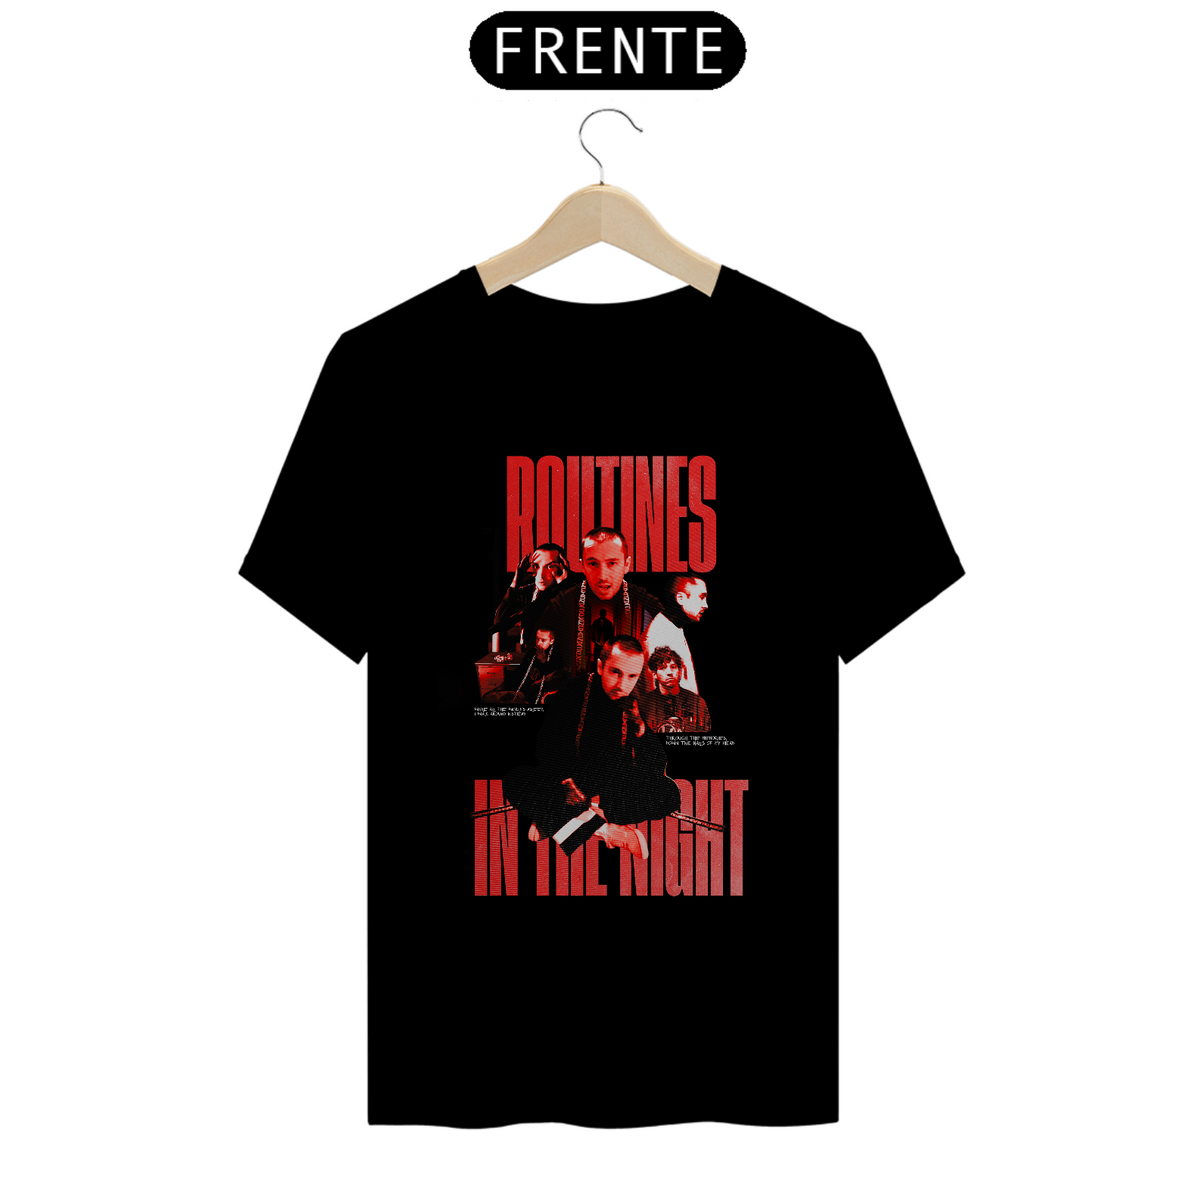 Nome do produto: CAMISA - ROUTINES IN THE NIGHT | TWENTY ONE PILOTS